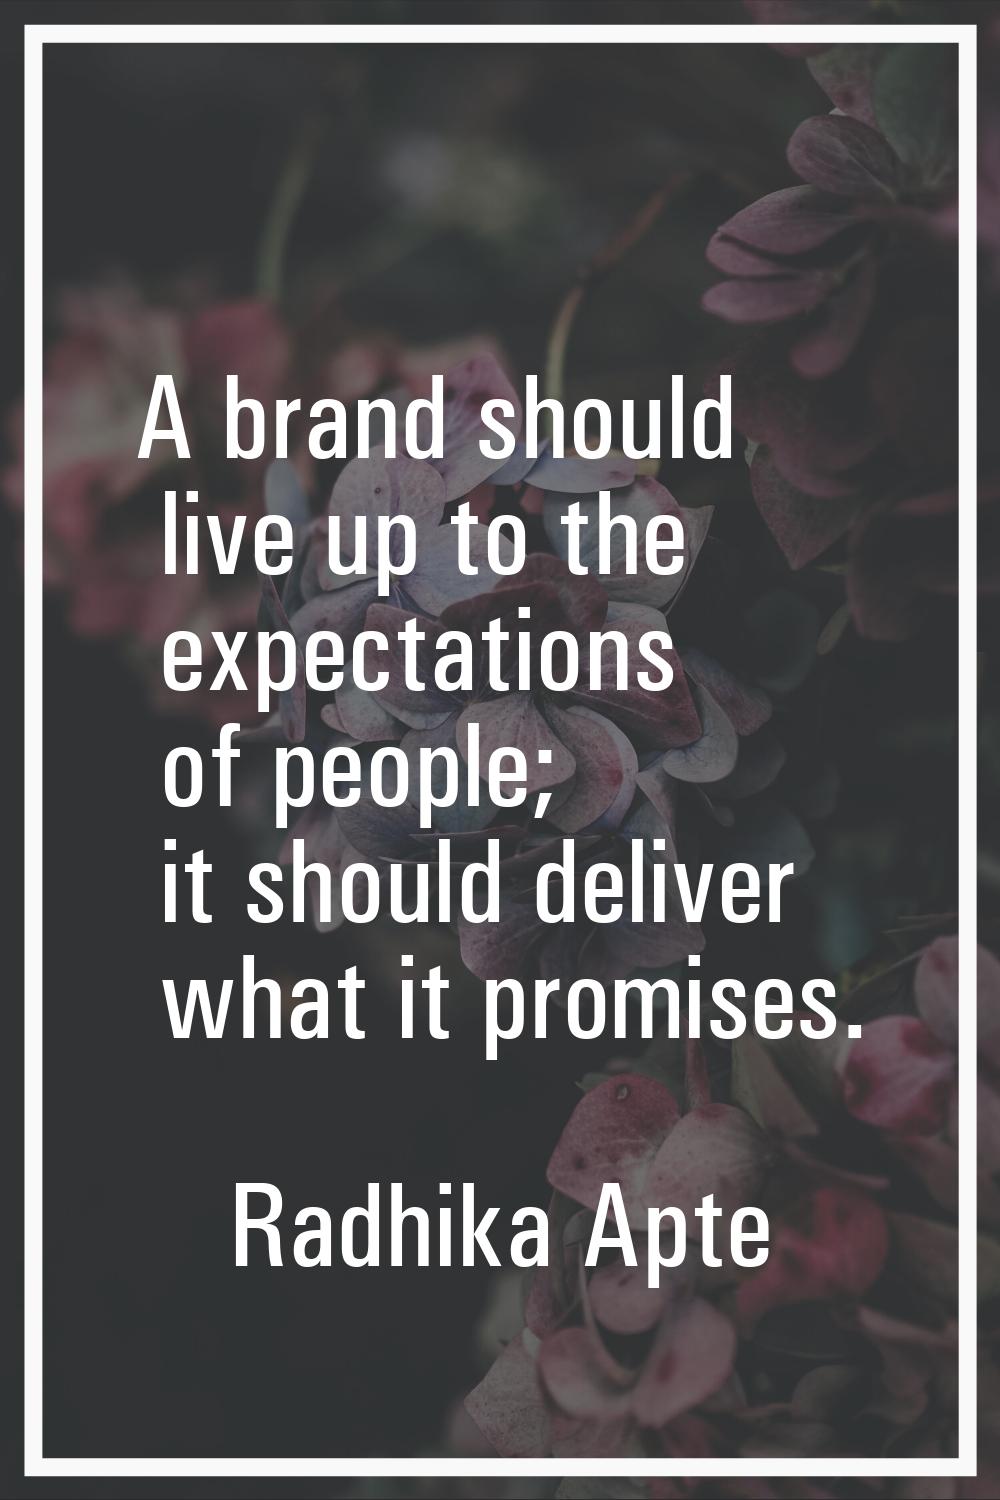 A brand should live up to the expectations of people; it should deliver what it promises.